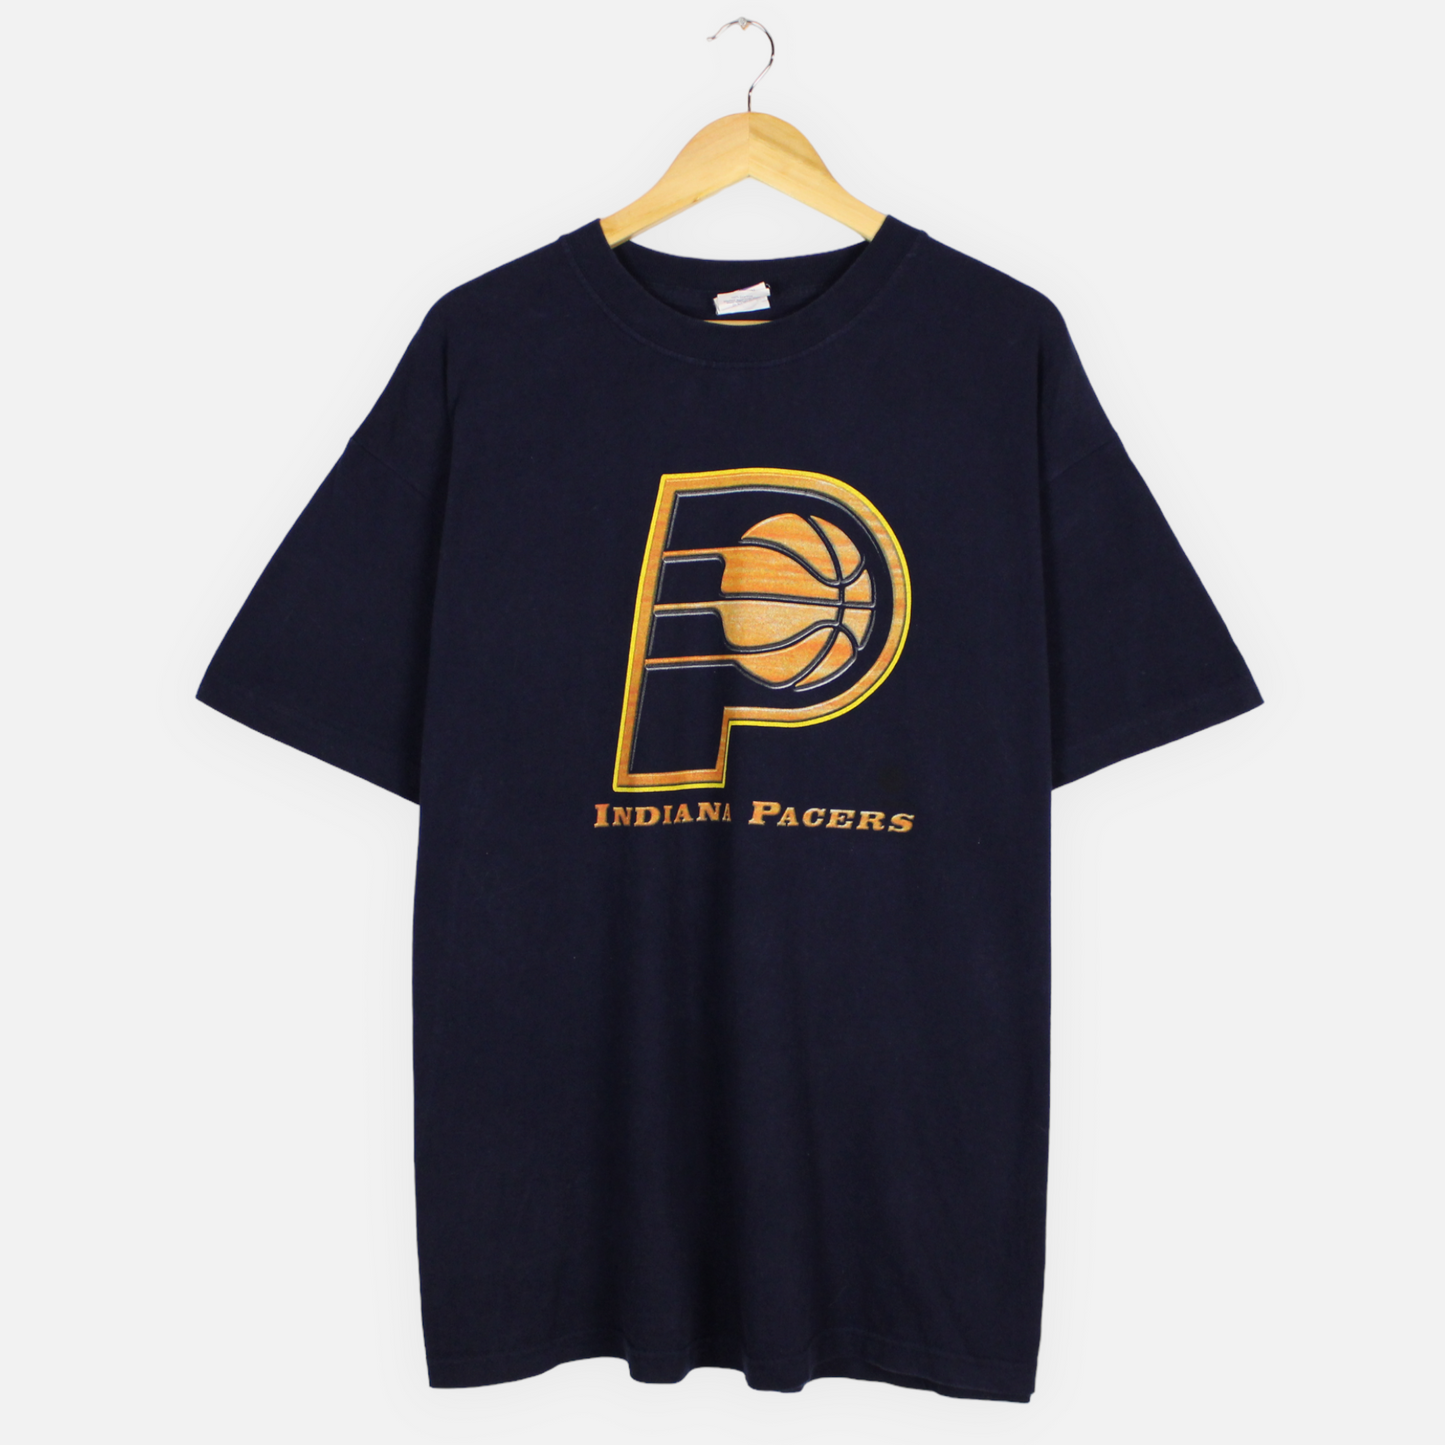 Vintage 90s Indiana Pacers NBA Tee - XL